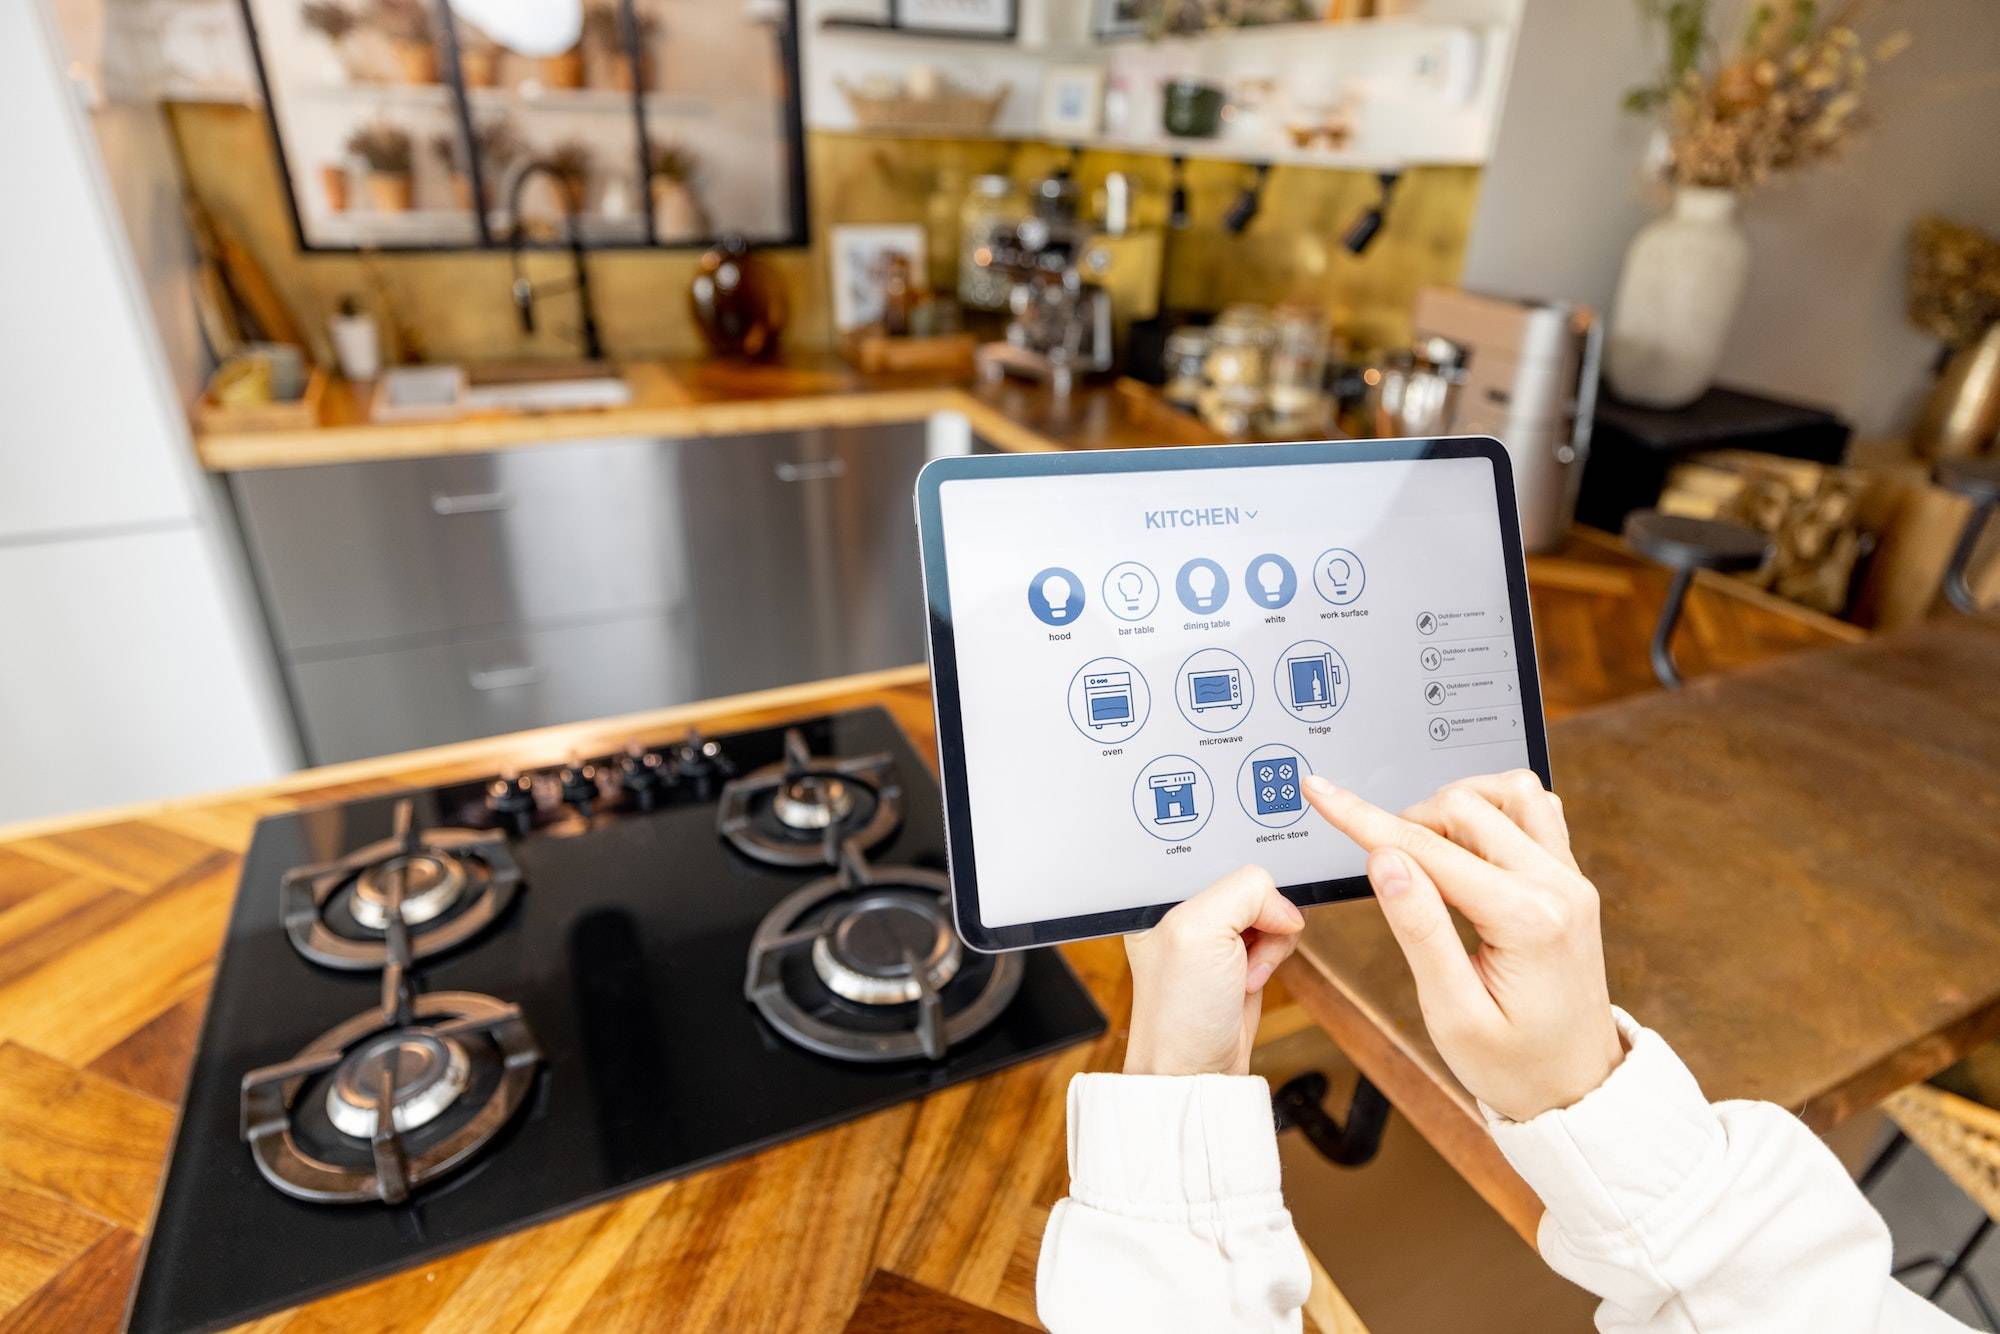 Woman holding digital tablet with running smart home application in the kitchen